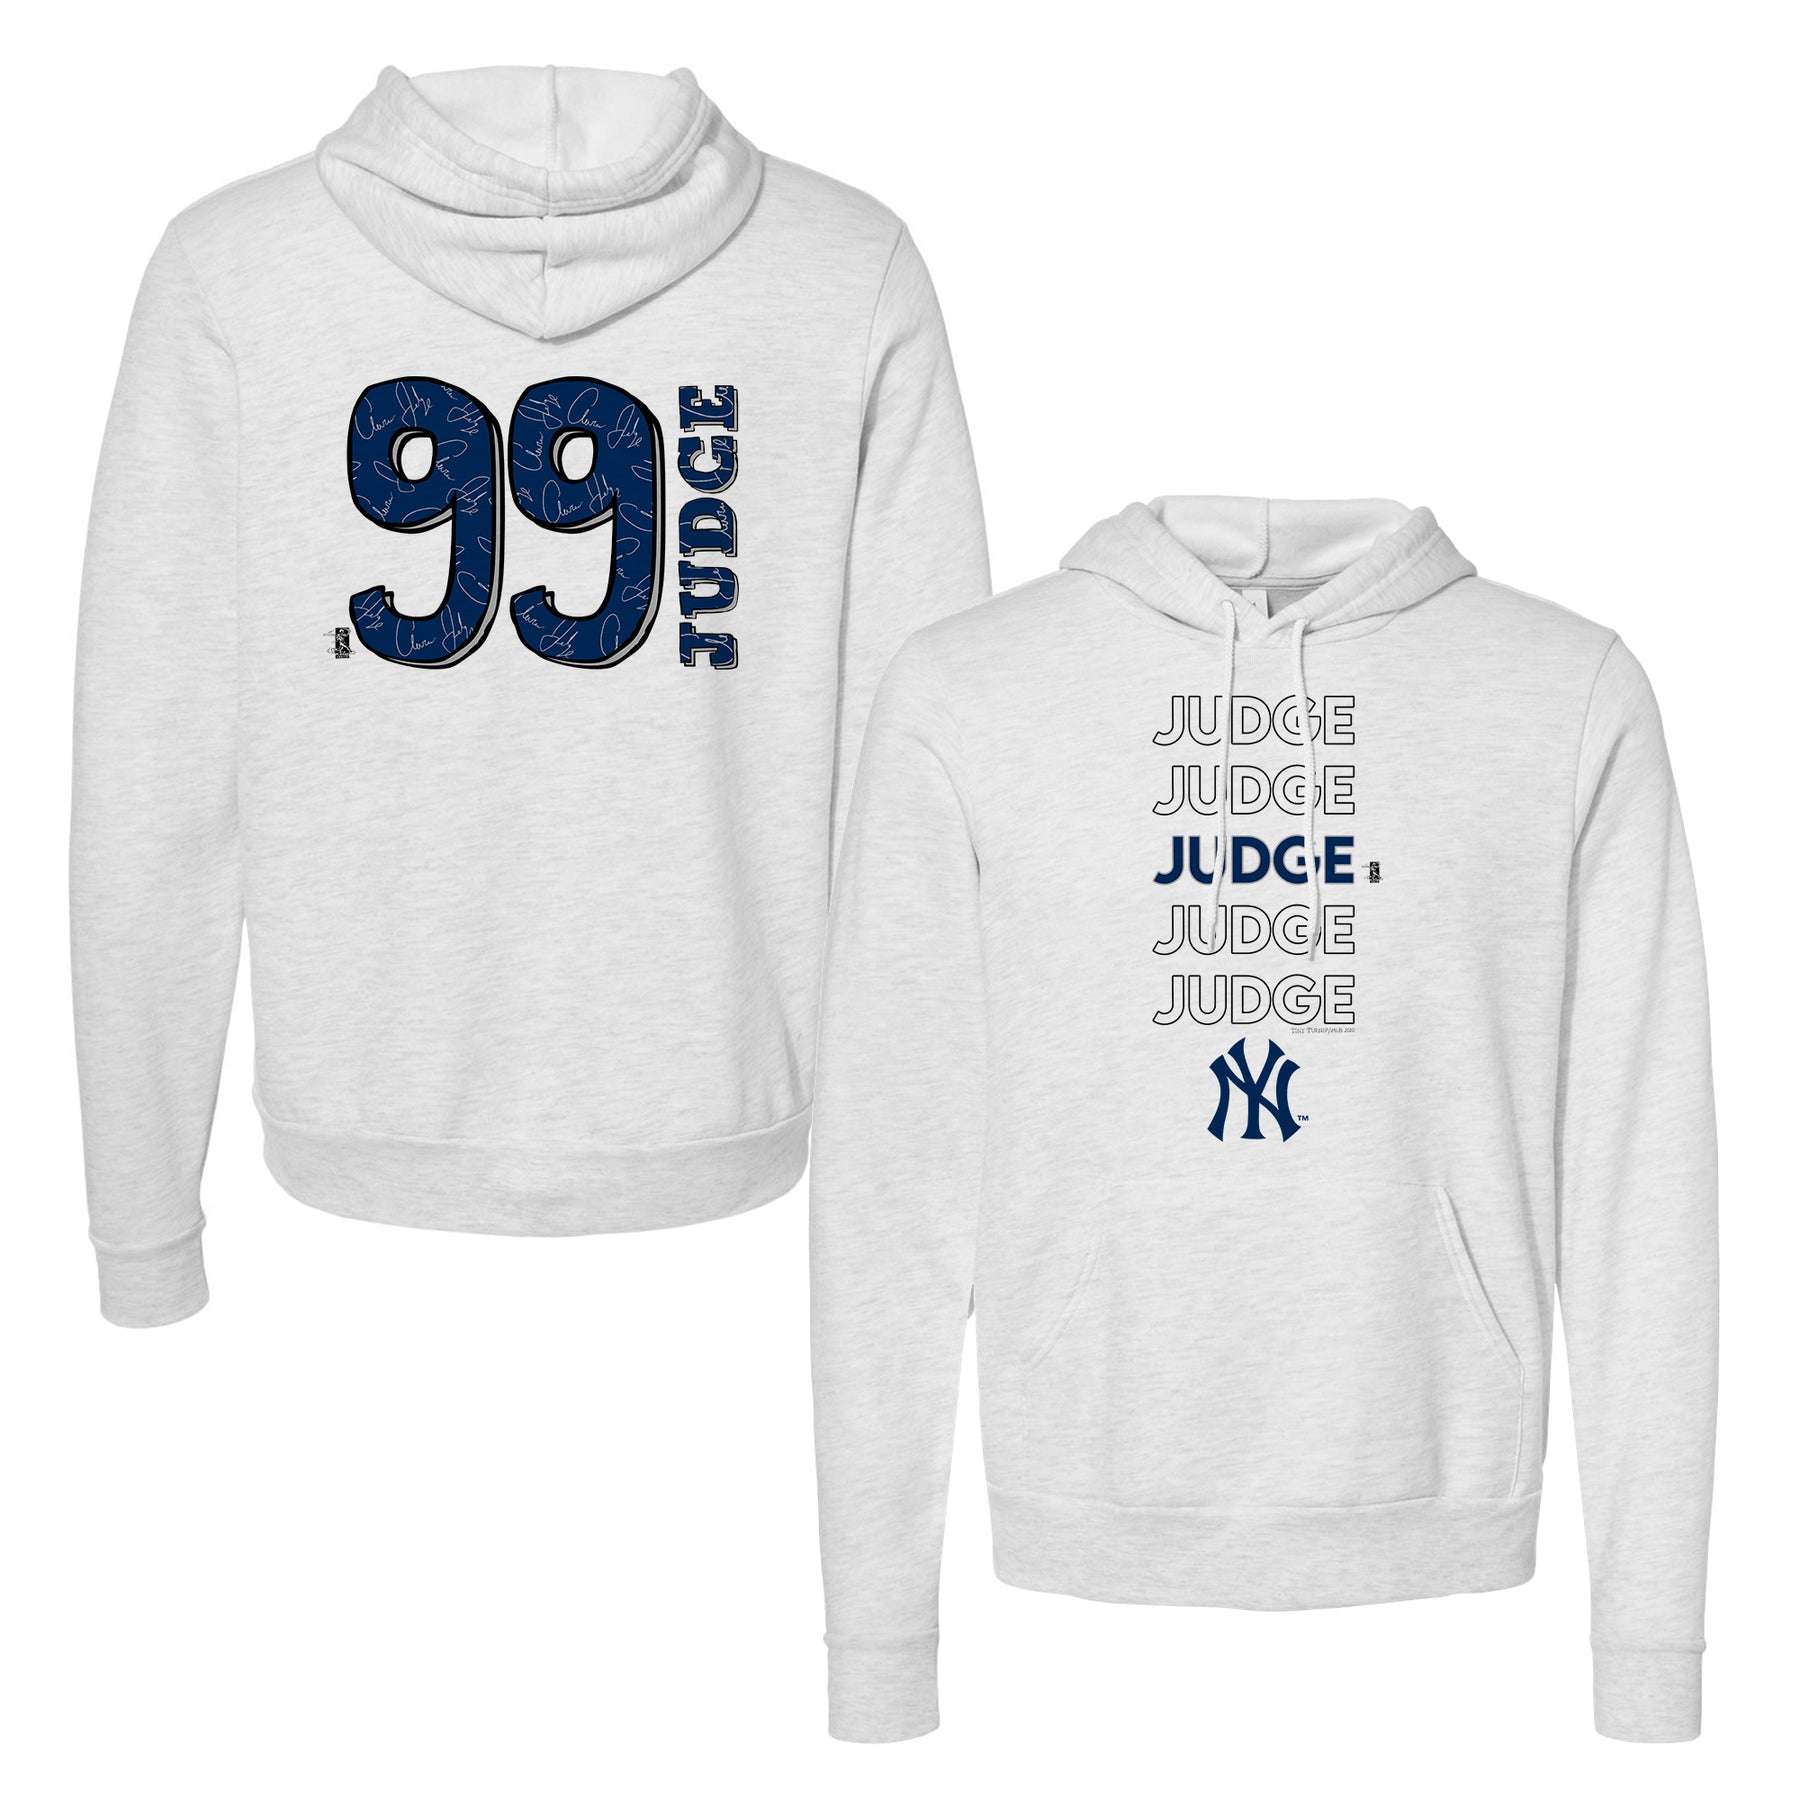 New York yankees Aaron Judge away gray and blue stitched baseball